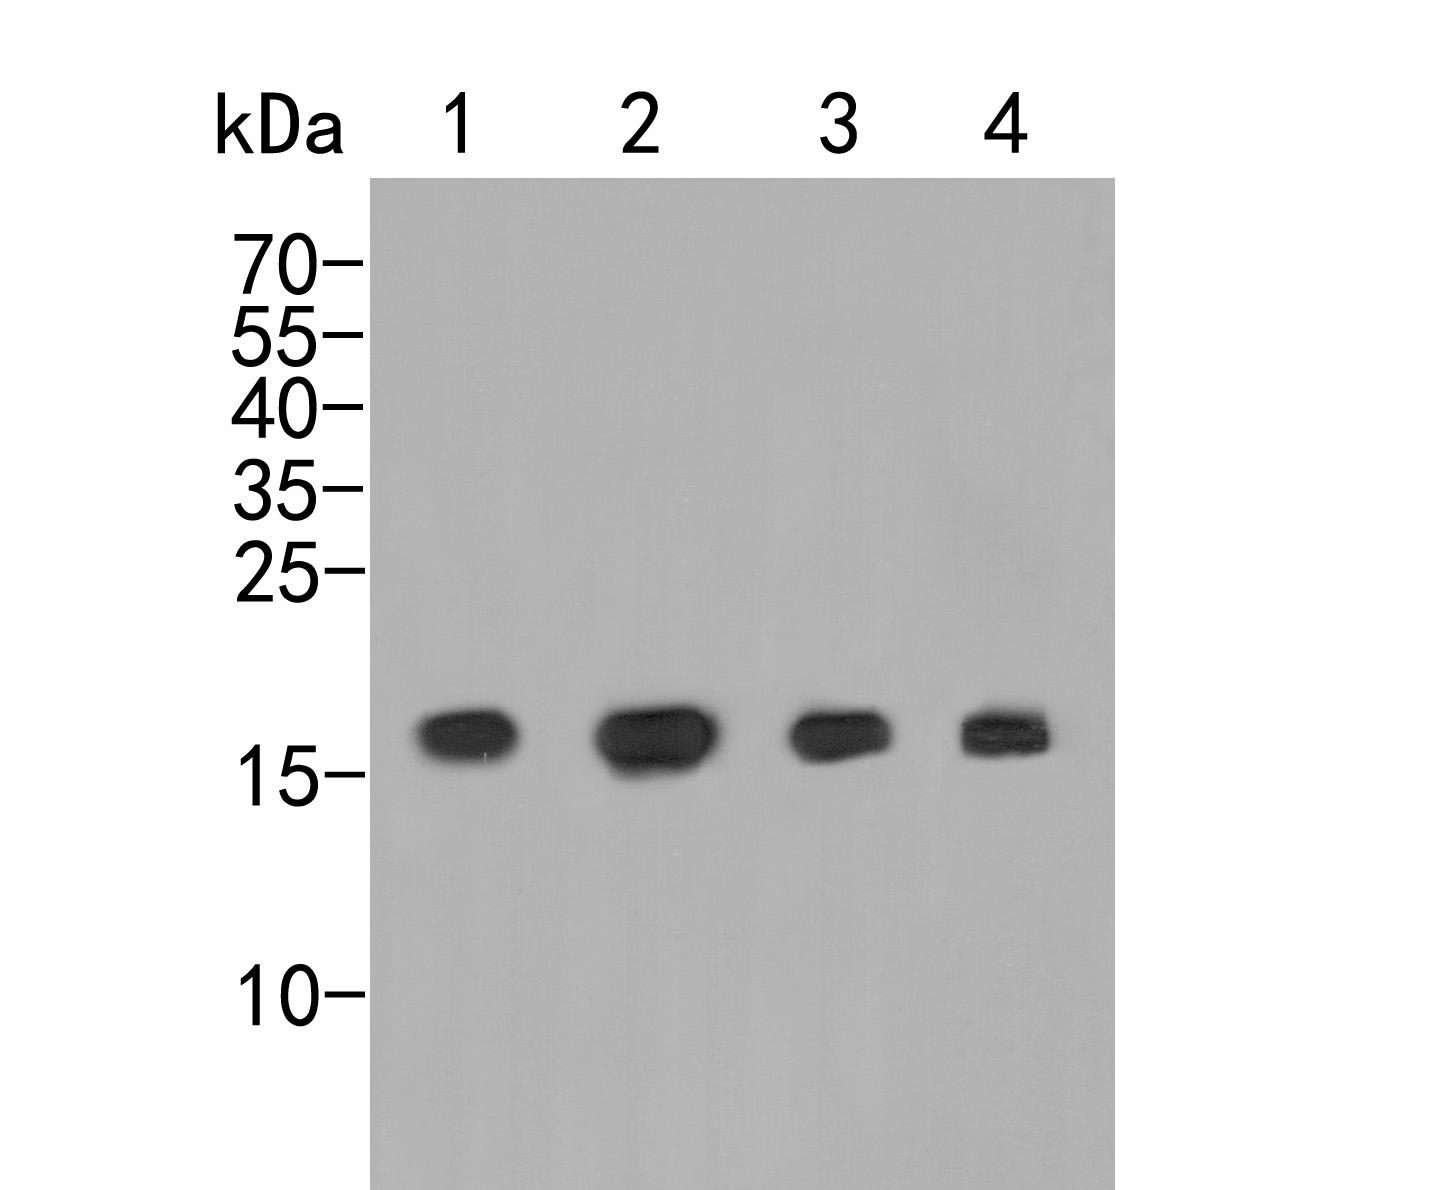 Western blot analysis of hNaa50p on different lysates. Proteins were transferred to a PVDF membrane and blocked with 5% BSA in PBS for 1 hour at room temperature. The primary antibody (ER2001-66, 1/500) was used in 5% BSA at room temperature for 2 hours. Goat Anti-Rabbit IgG - HRP Secondary Antibody (HA1001) at 1:5,000 dilution was used for 1 hour at room temperature.<br />
Positive control: <br />
Lane 1: A431 cell lysate<br />
Lane 2: Hela cell lysate<br />
Lane 3: Mouse stomach tissue lysate<br />
Lane 4: Rat cerebellum tissue lysate